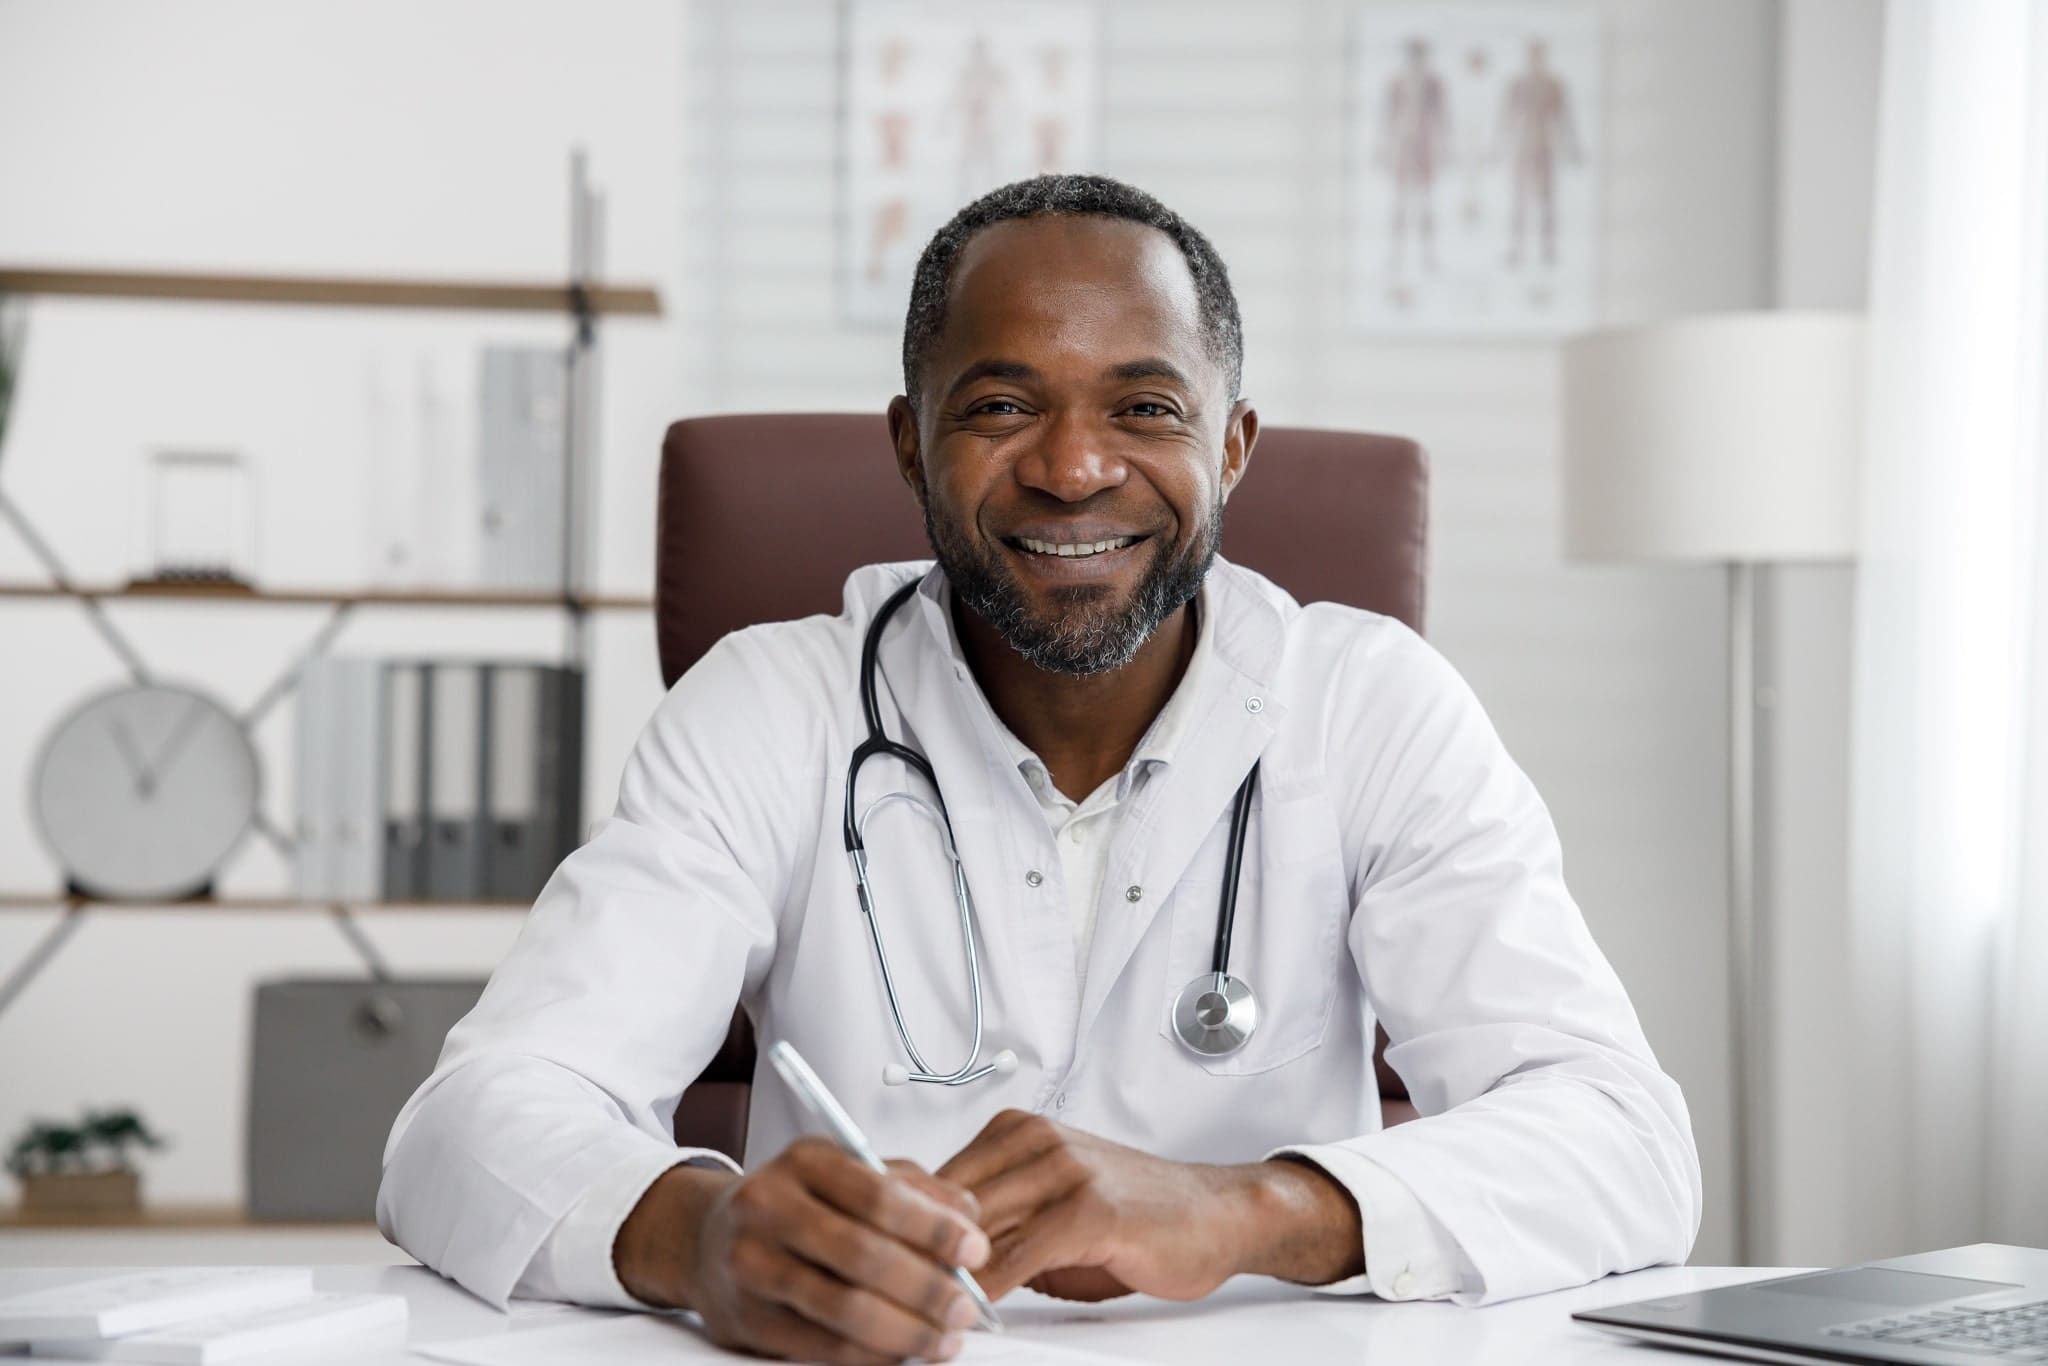 African American male doctor sitting in office chair at desk wearing white doctor coat and stethoscope around neck.